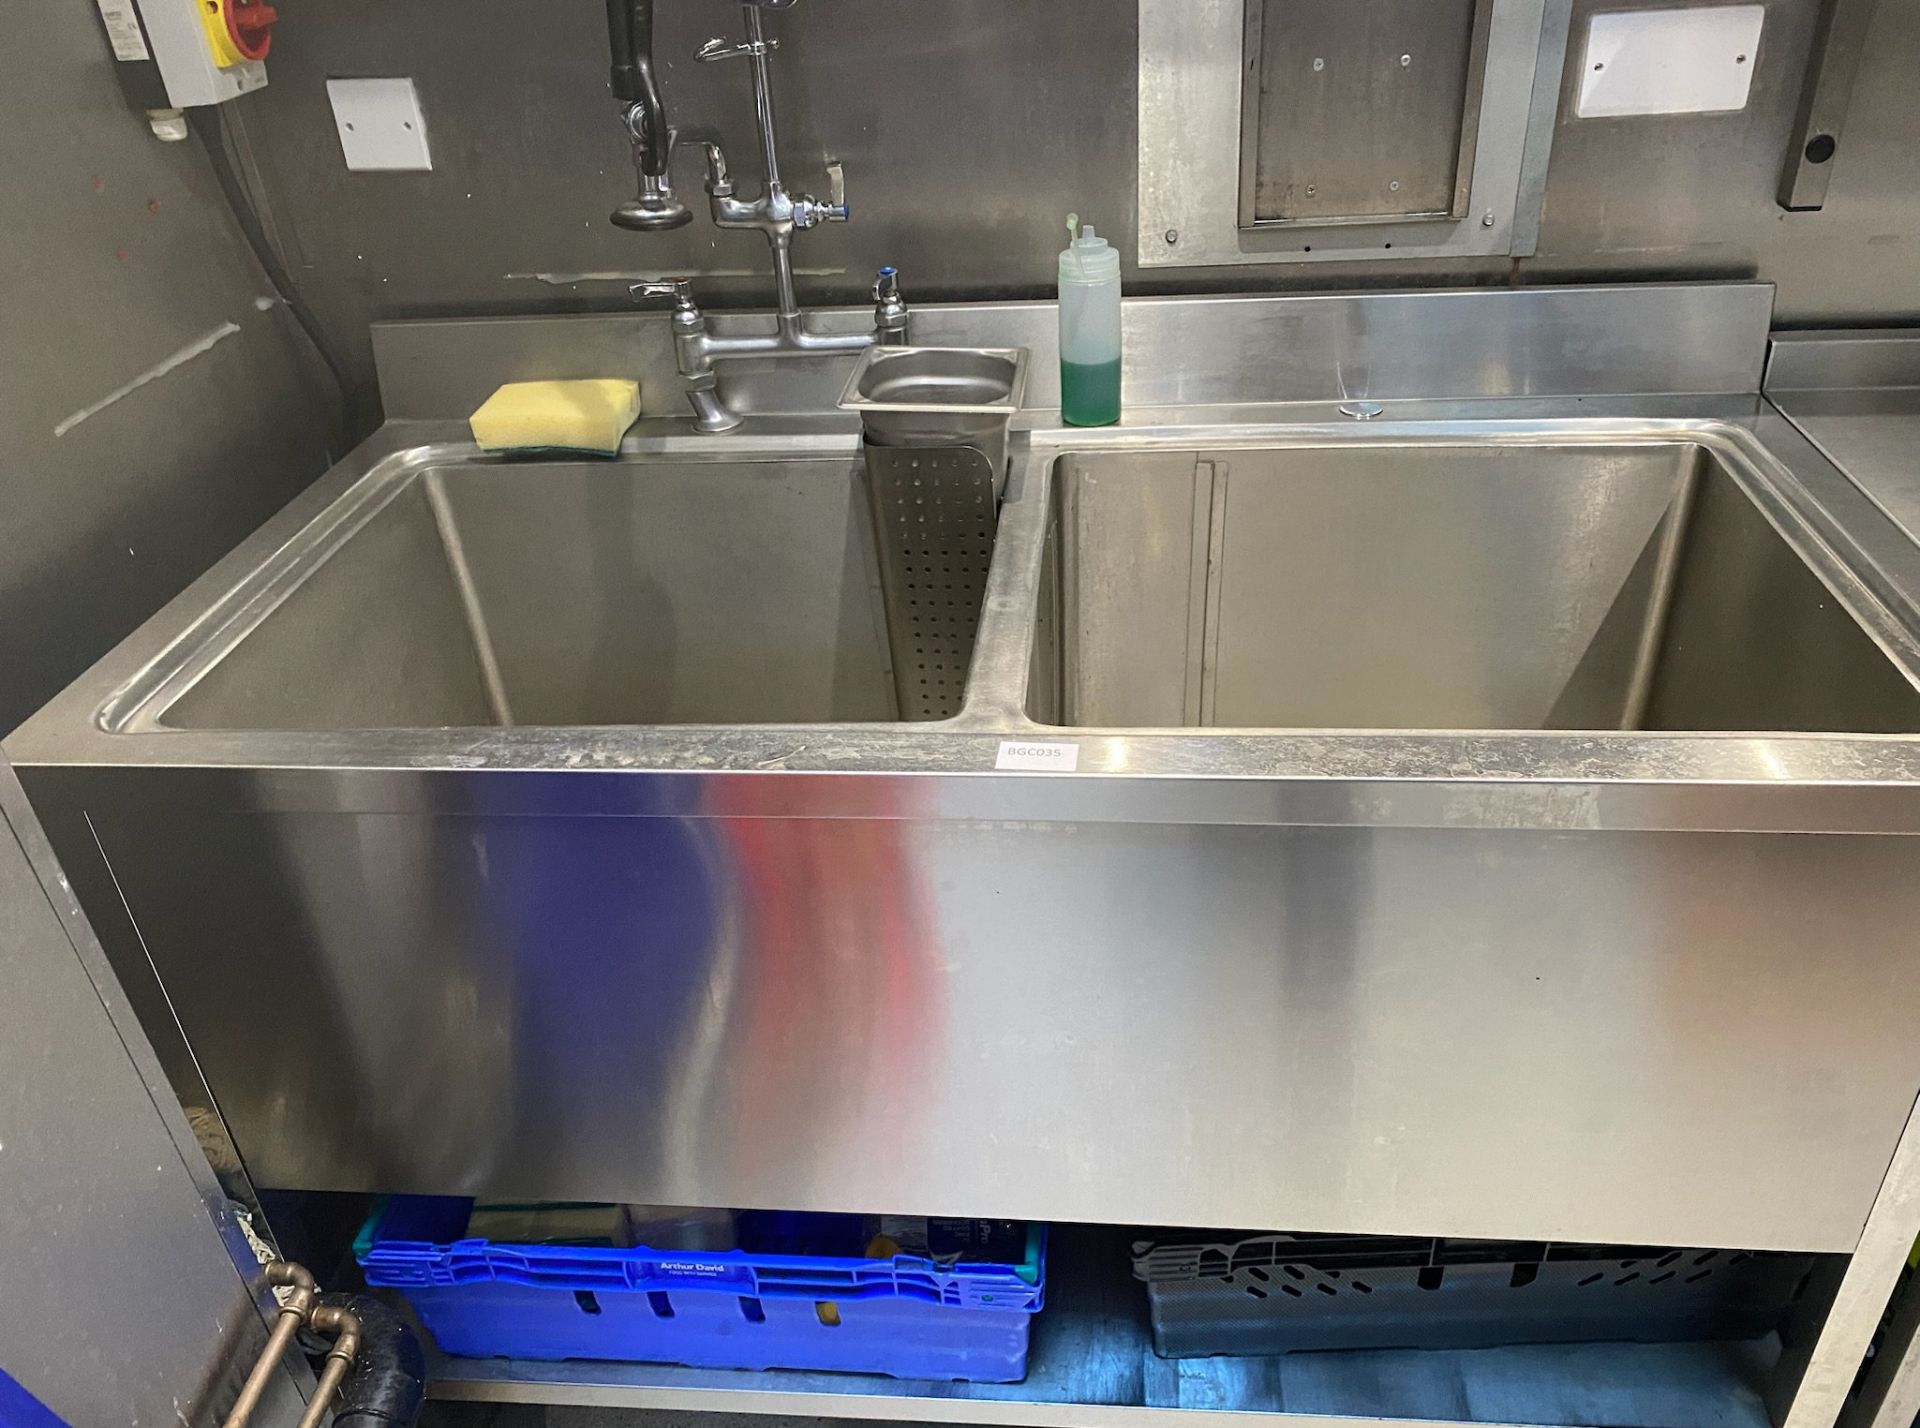 1 x Large Stainless Steel Freestanding Commercial Double Sink Unit With Hot And Cold Tap And Rinse